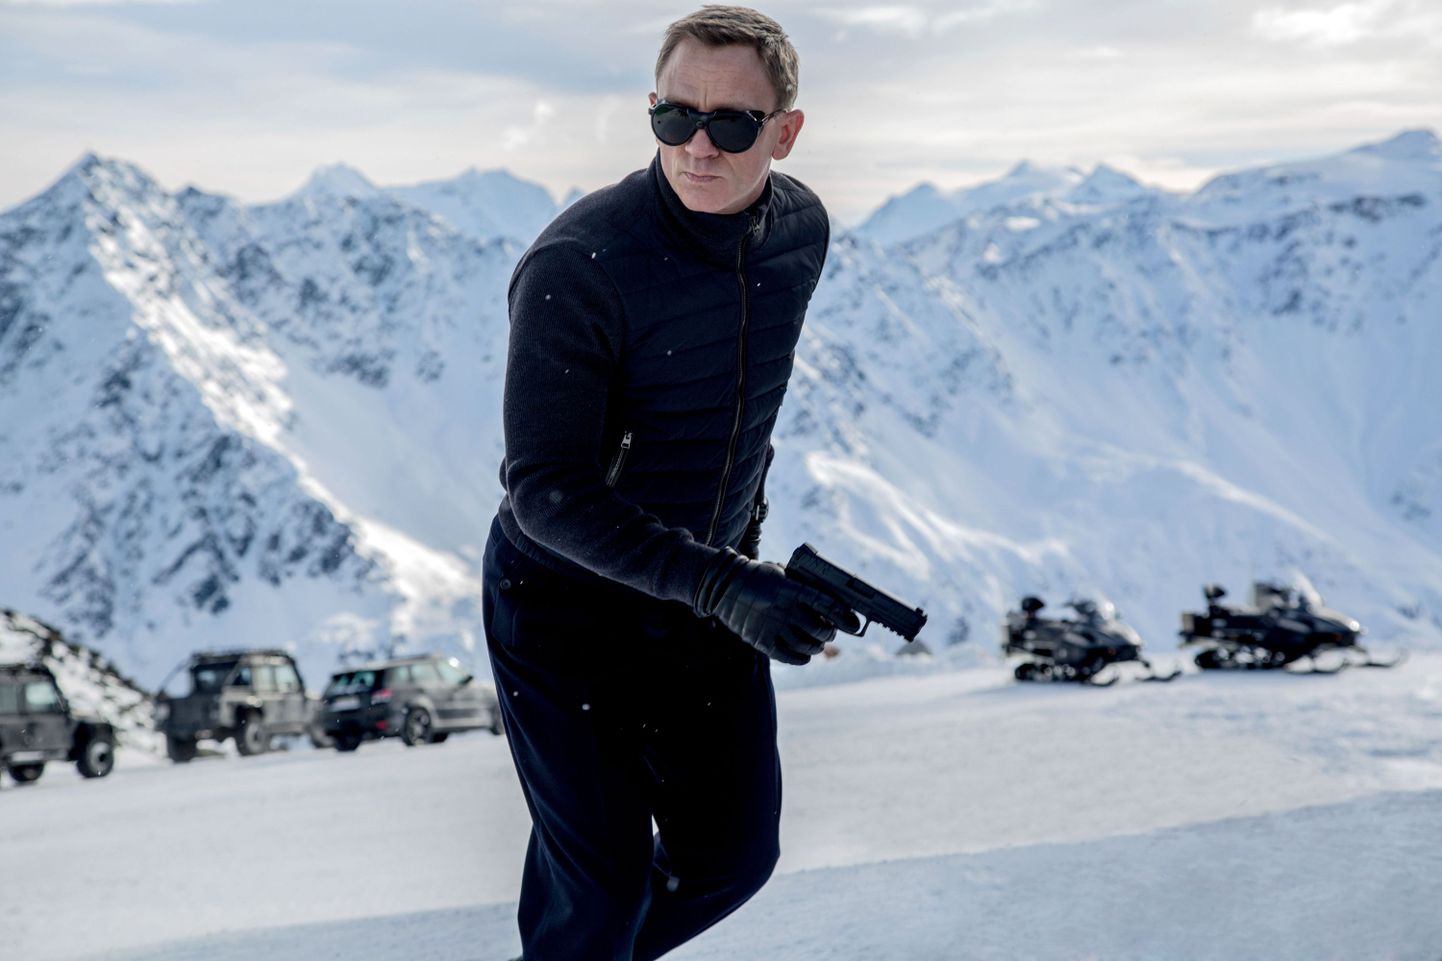 In this image released by Metro-Goldwyn-Mayer Pictures/Columbia Pictures/EON Productions, Daniel Craig appears in a scene from the James Bond film, "Spectre." The movie releases in U.S. theaters on Nov. 6, 2015. (Jonathan Olley/Metro-Goldwyn-Mayer Pictures/Columbia Pictures/EON Productions via AP)